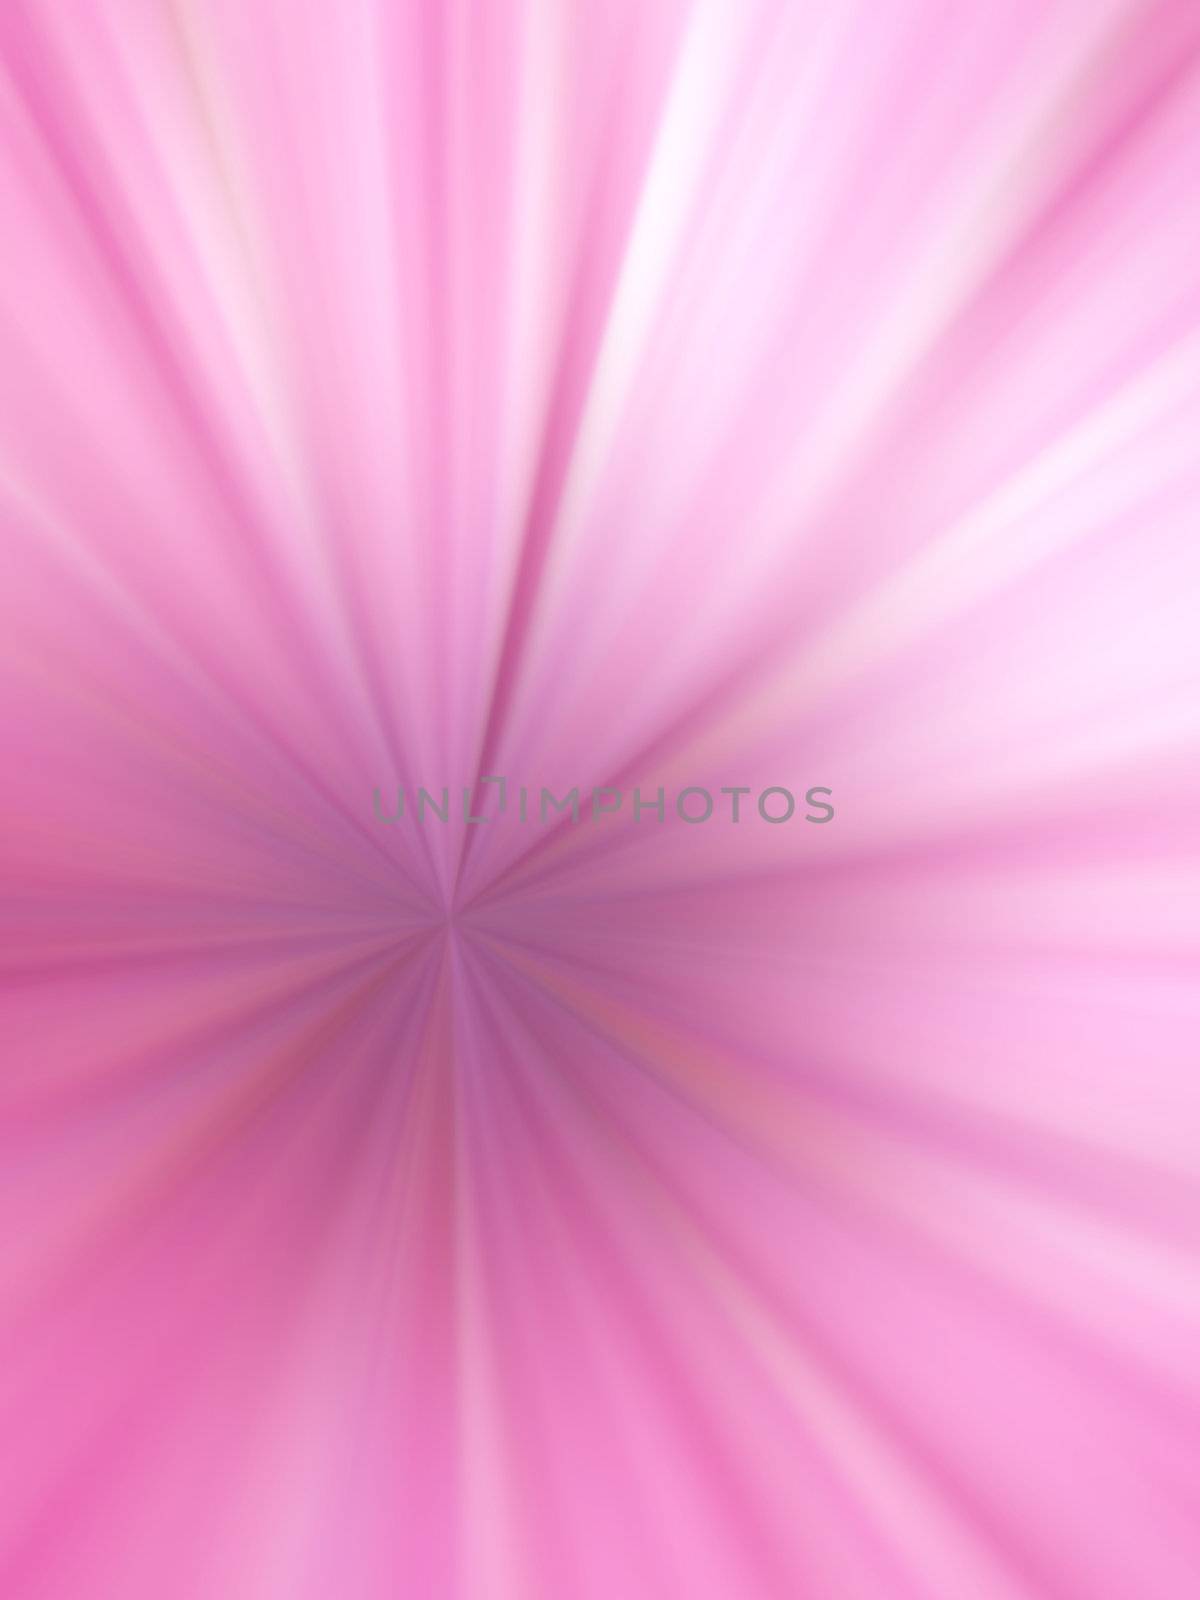 pink abstract background suitable for scrapbooking or other